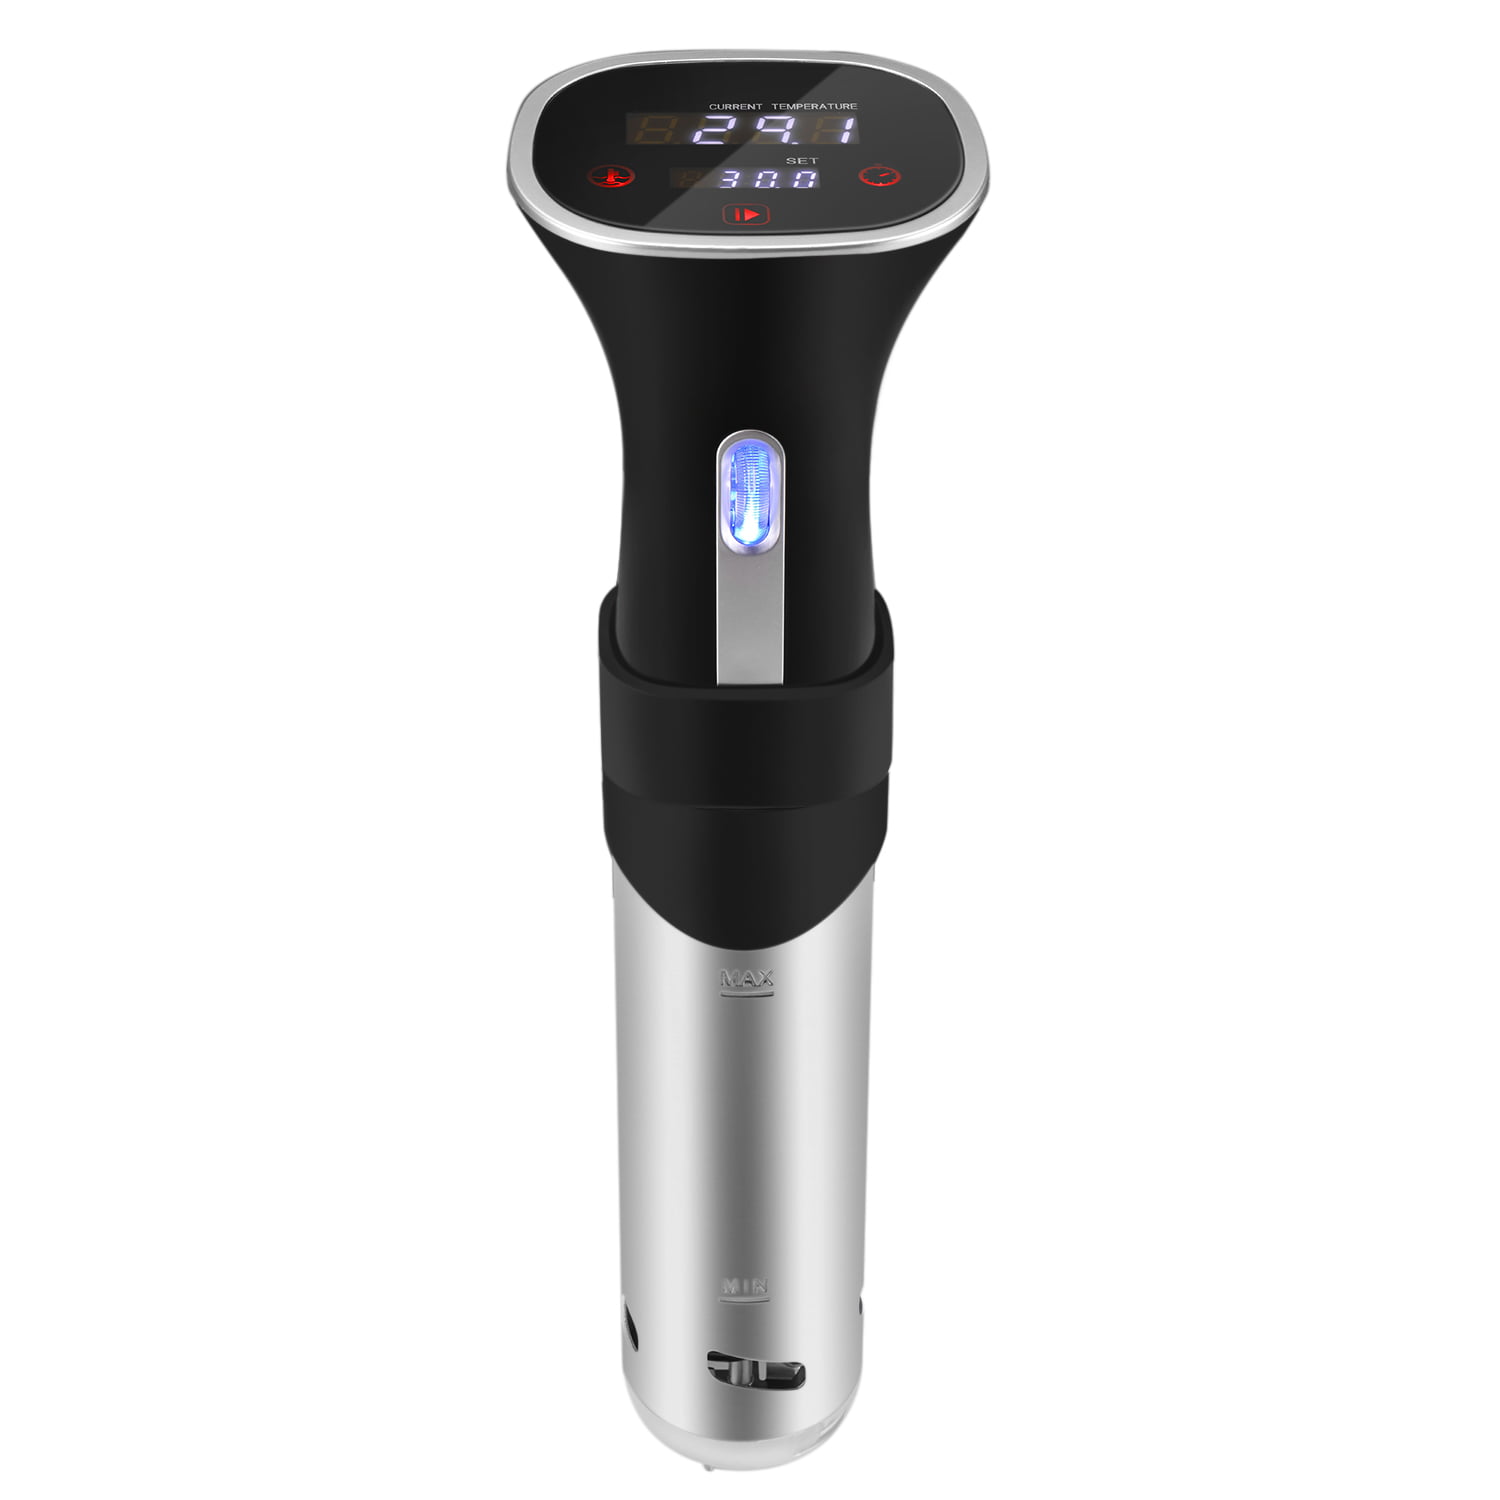 Sous Vide Cooker Machine - Precision Immersion Circulator Thermal Cooking  Pod with Digital LCD Display Temperature for Professional & Home Cooking  Kitchen Culinary Tool 